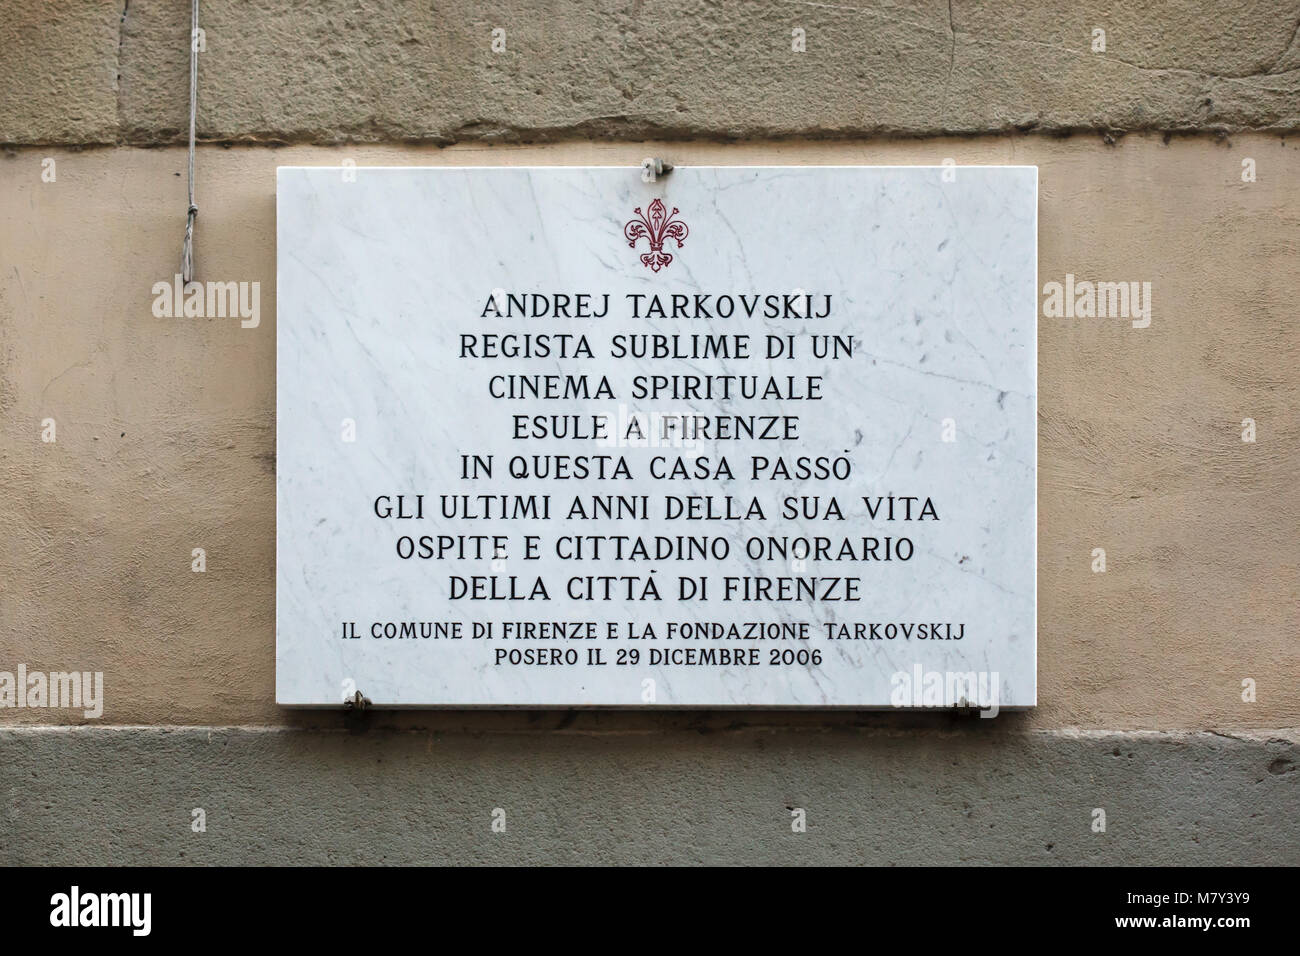 Commemorative plaque on the house where Russian film director Andrei Tarkovsky lived in Via di San Niccolò 91 in Florence, Tuscany, Italy. Andrei Tarkovsky lived in this house from 1983 to 1986 and completed here the script of his last film The Sacrifice. Stock Photo